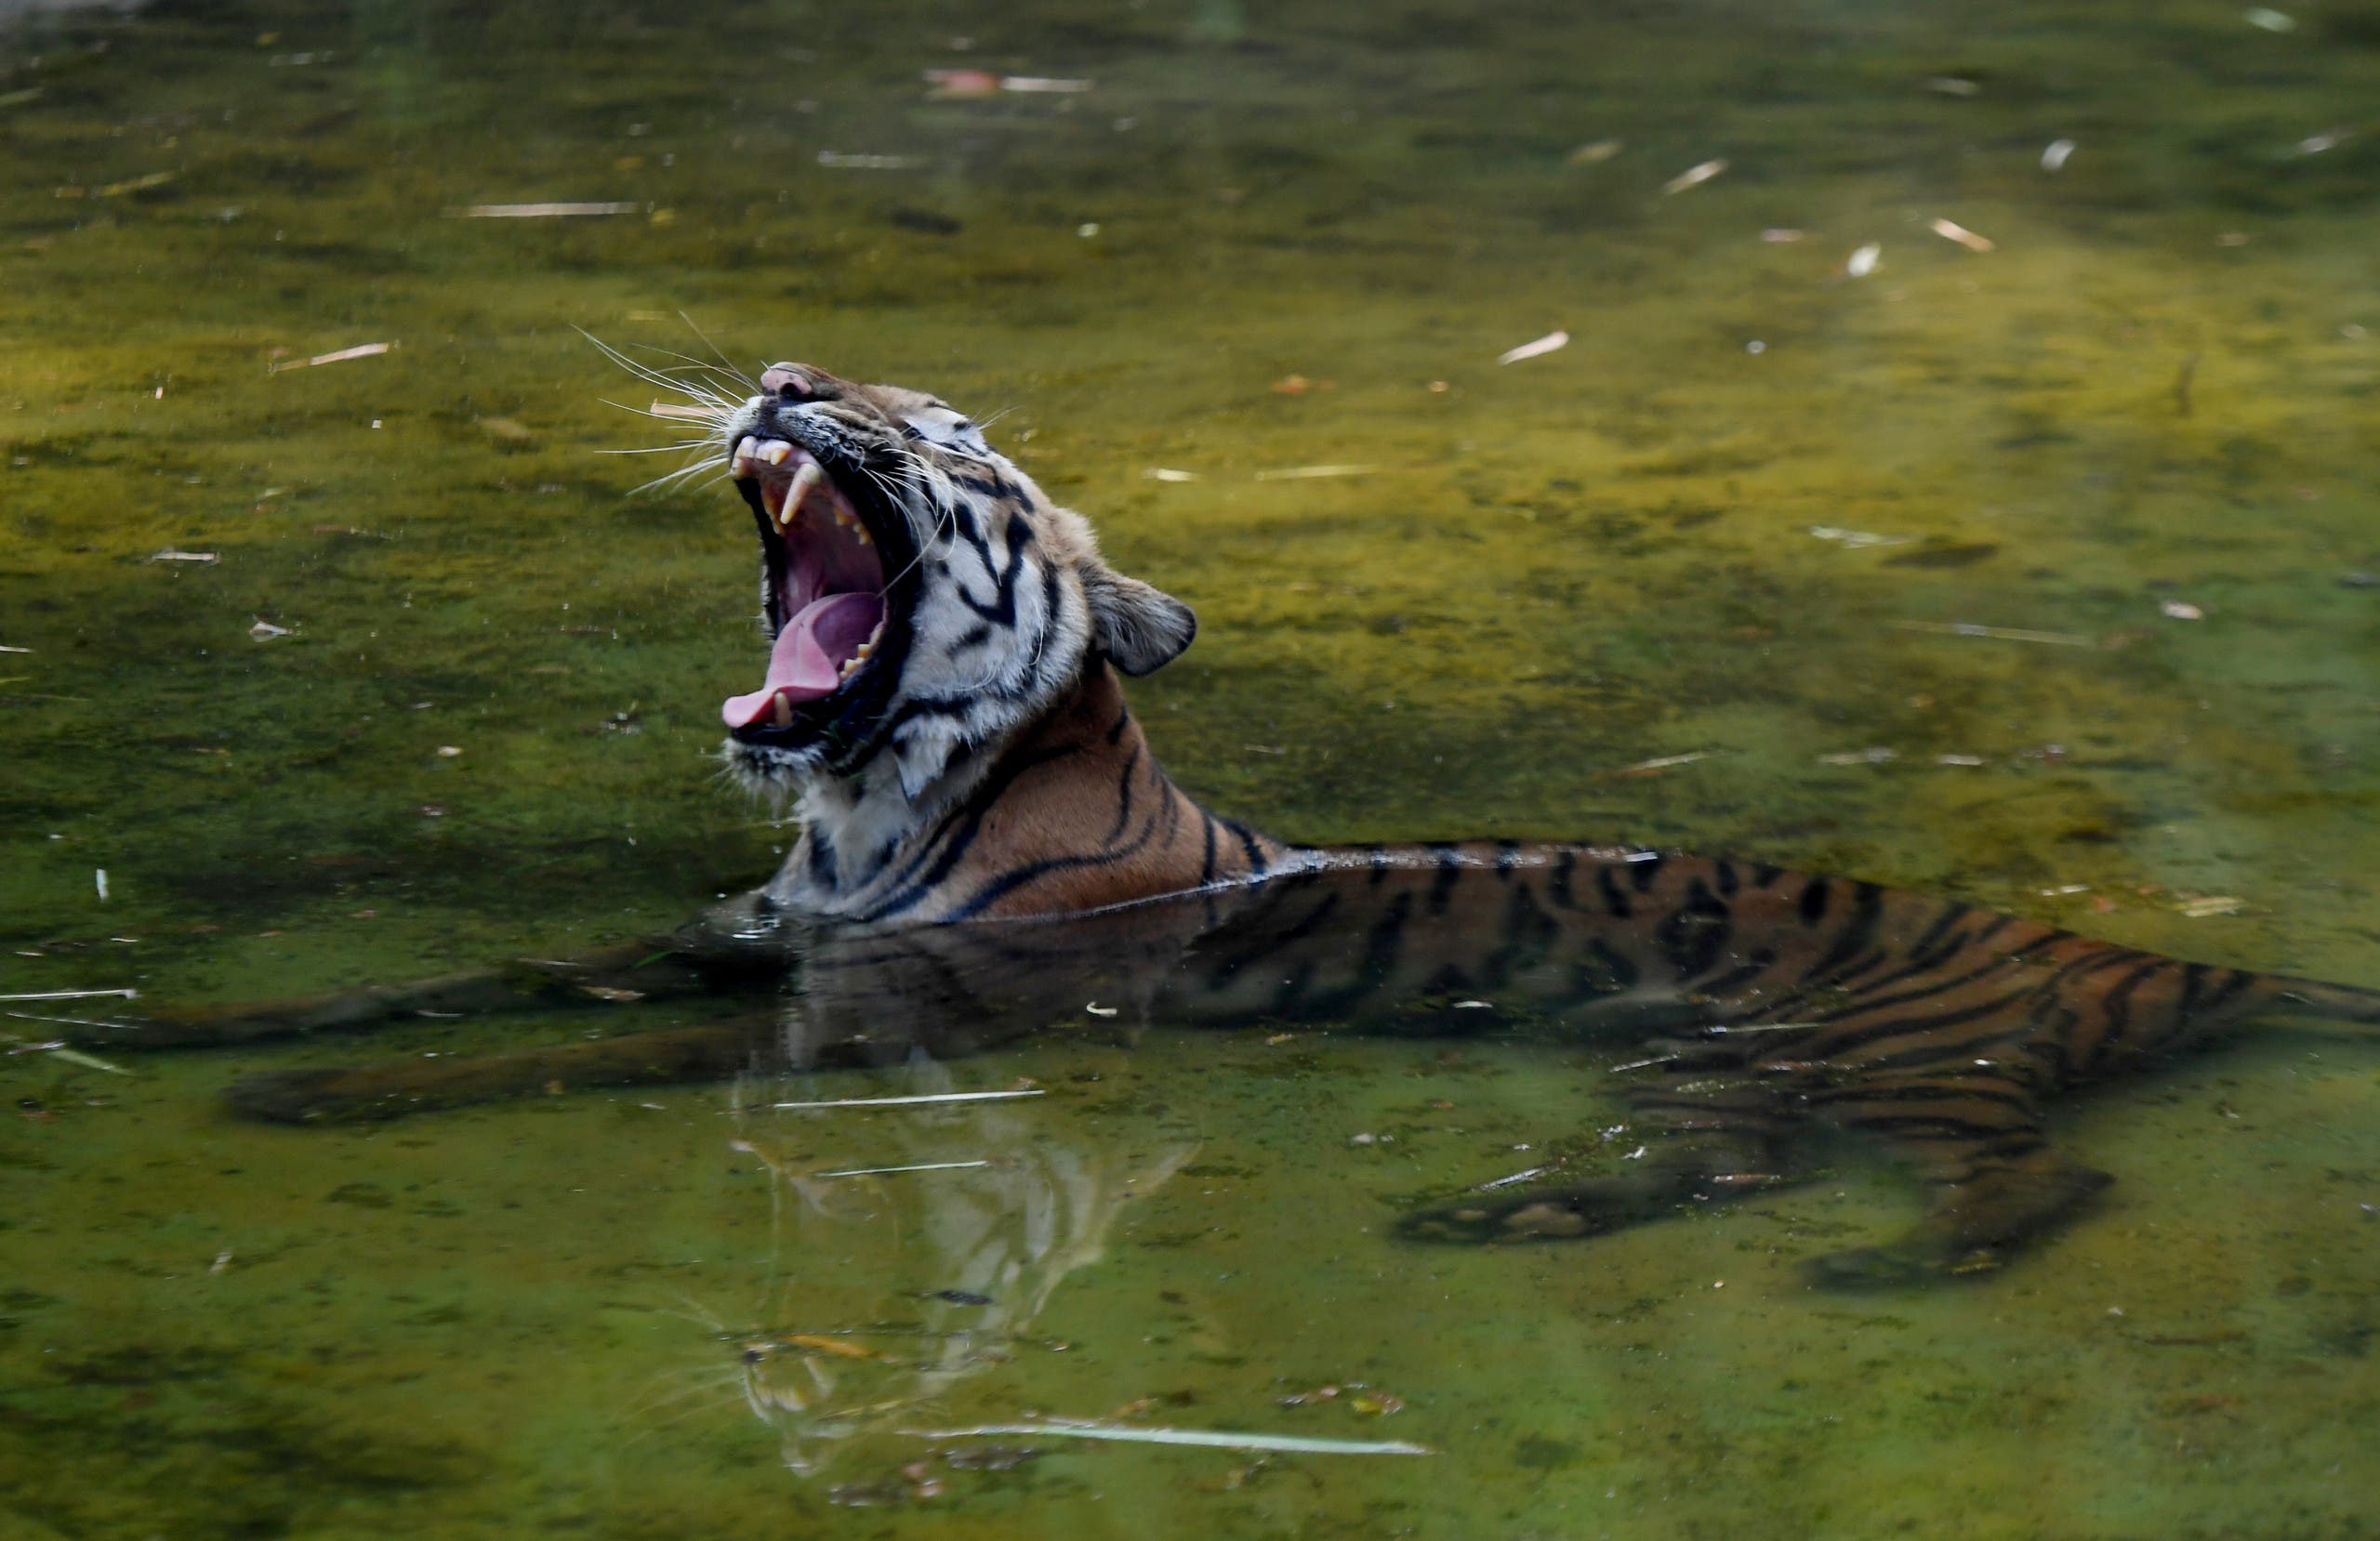 An Indian tiger rests in a pool of water amid rising temperatures at Alipore Zoological Gardens in Kolkata on May 16, 2017. AFP